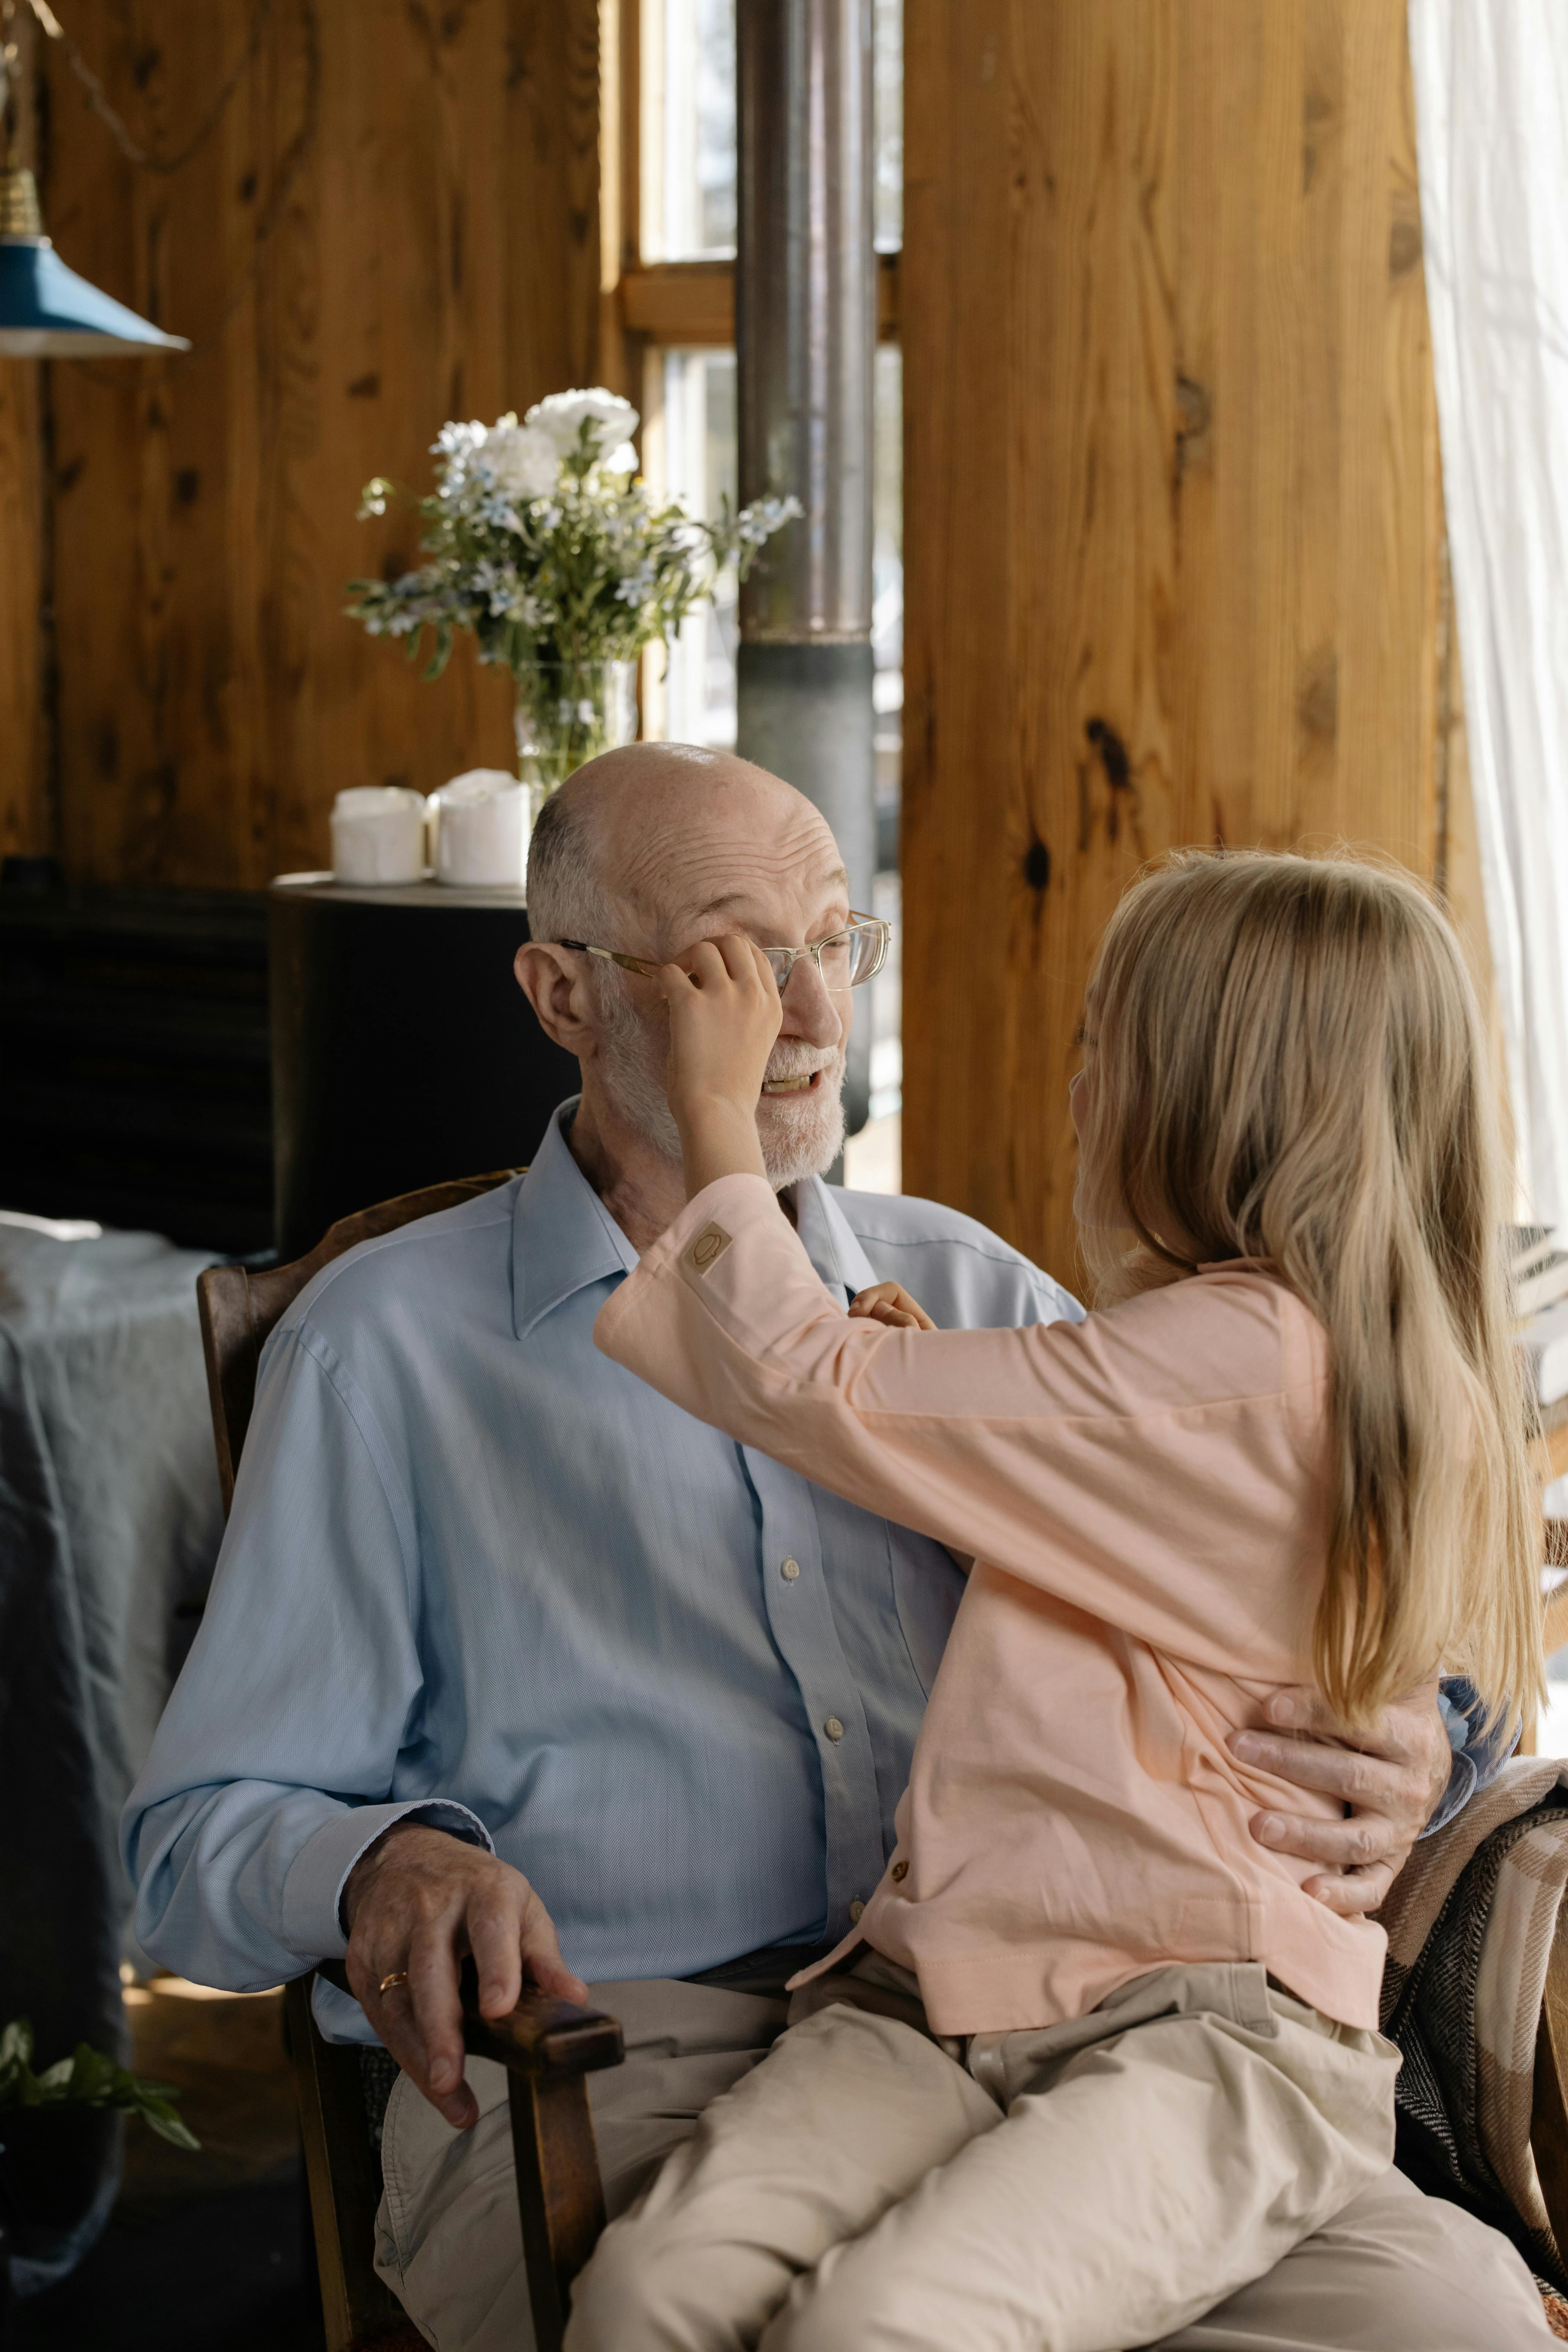 A grandfather and granddaughter | Source: Pexels